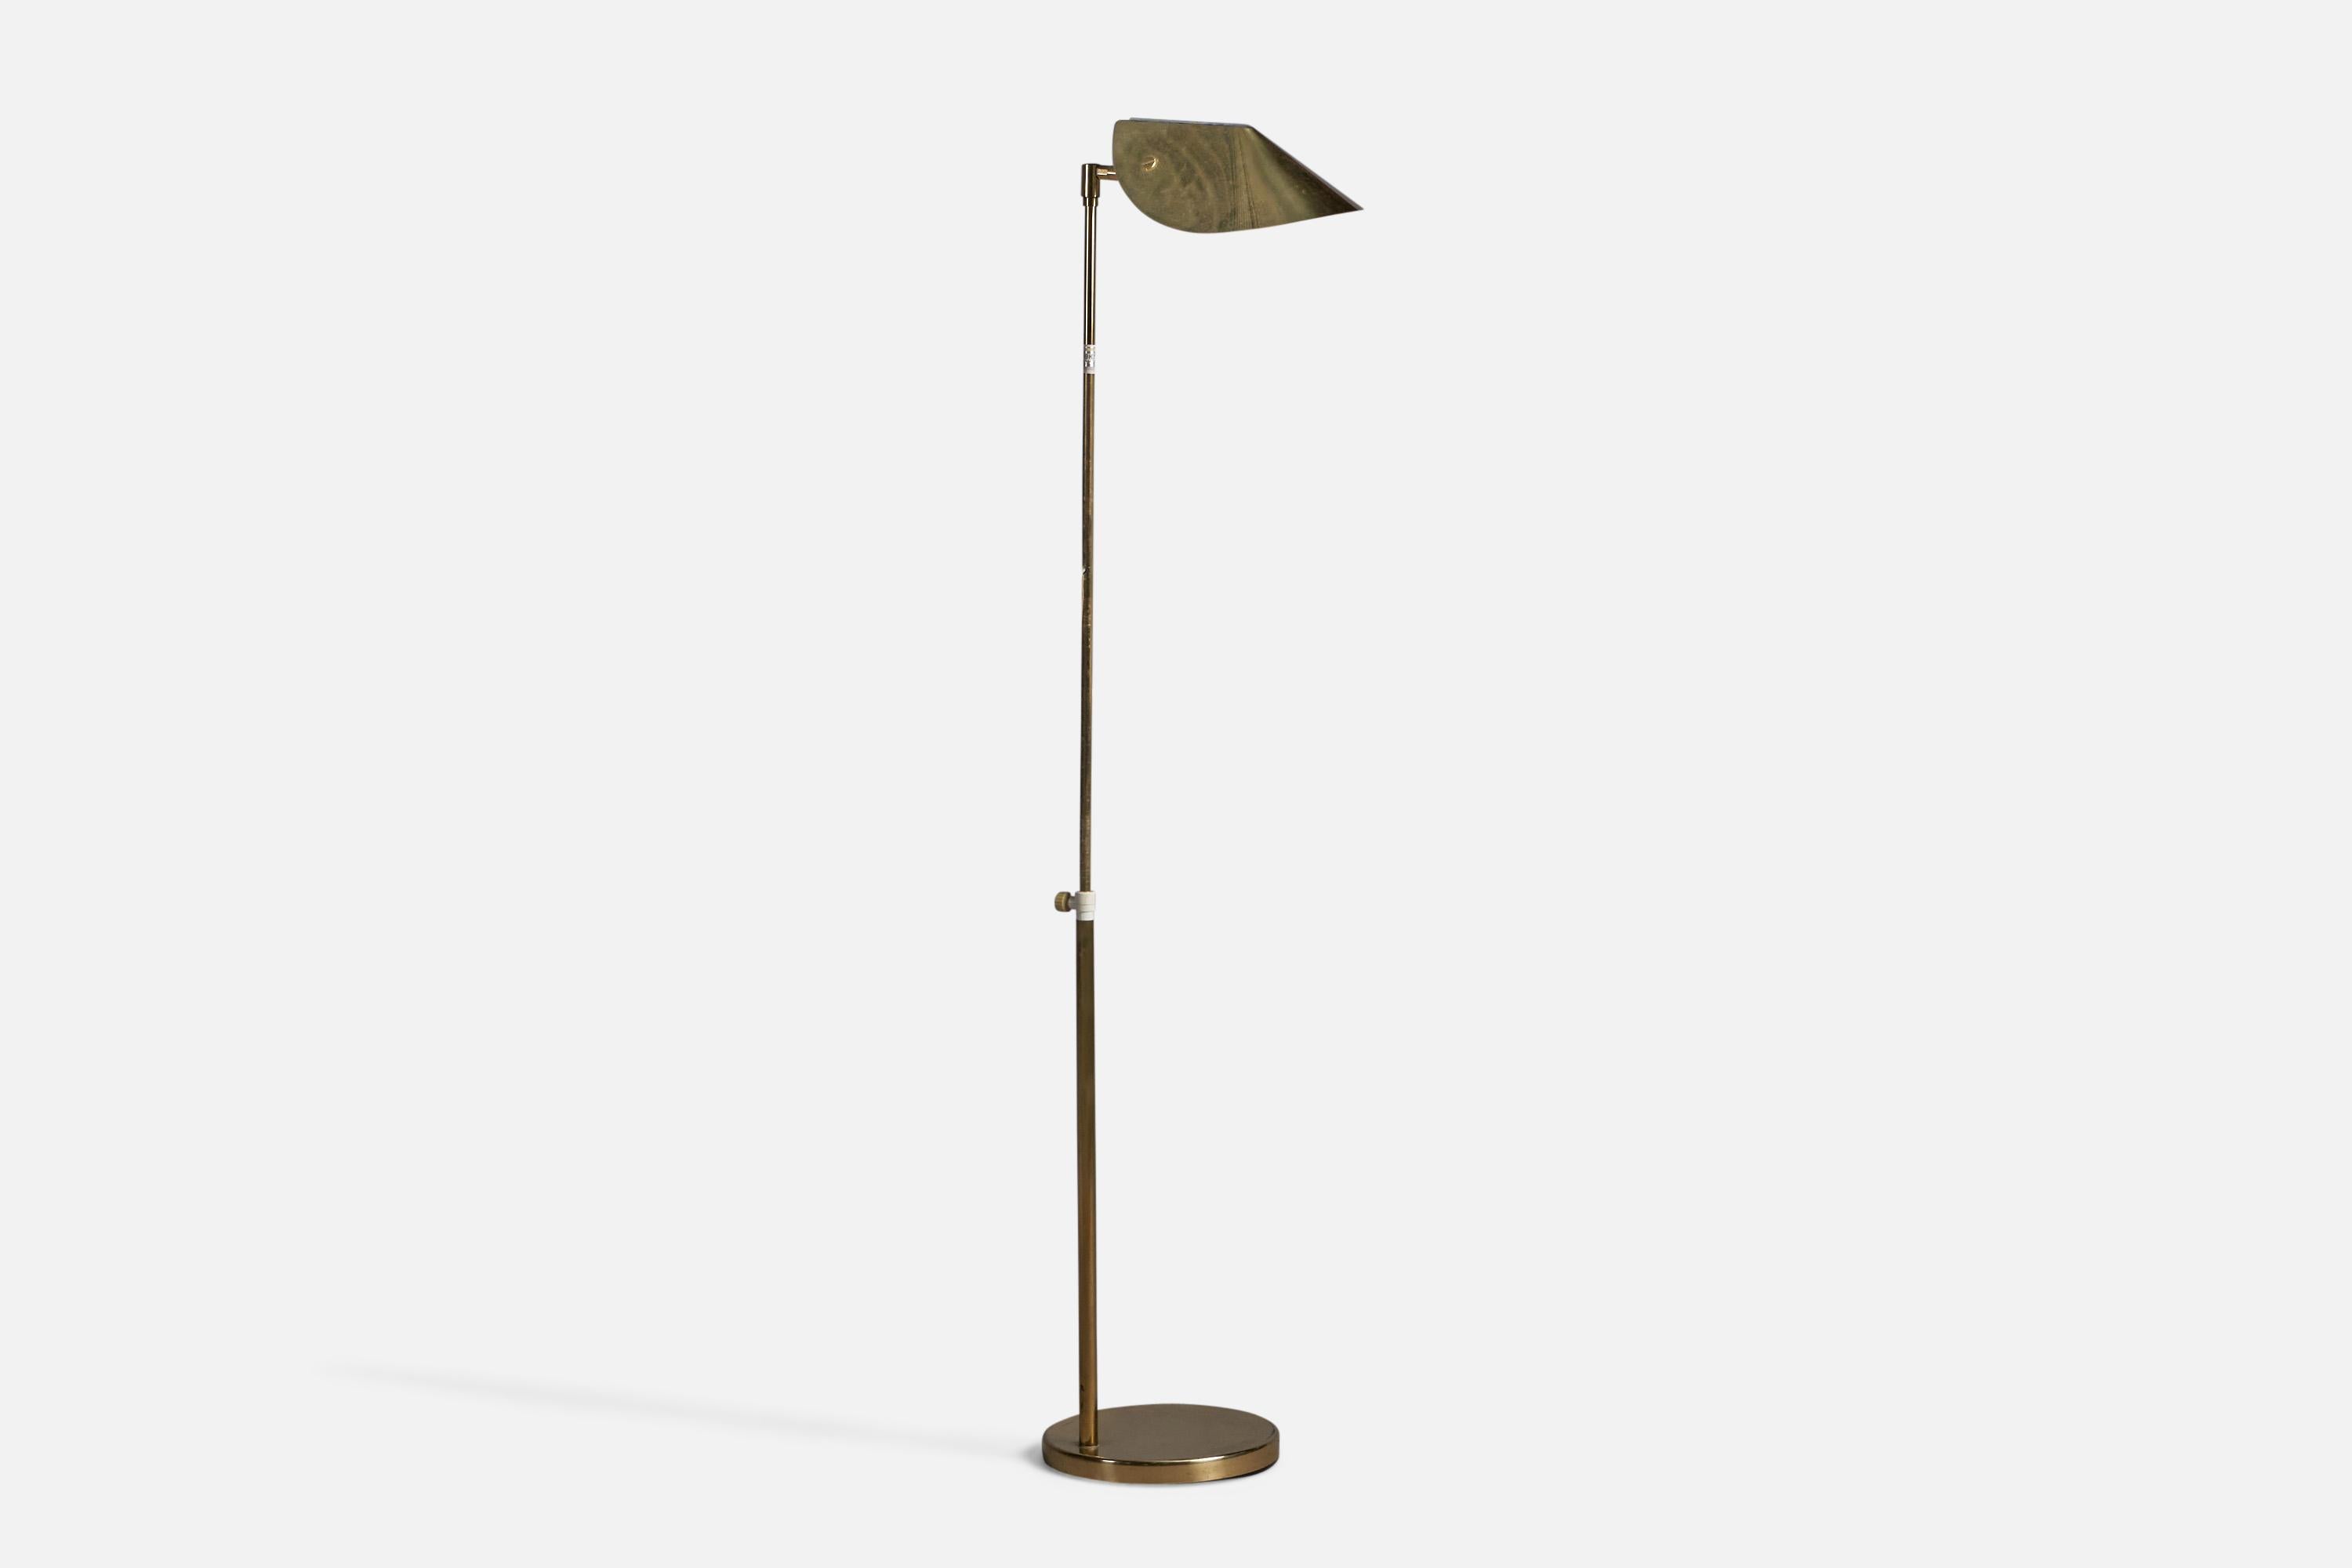 An adjustable brass floor lamp designed and produced by Aneta, Sweden, c. 1980s.

Overall Dimensions (inches): 48.75